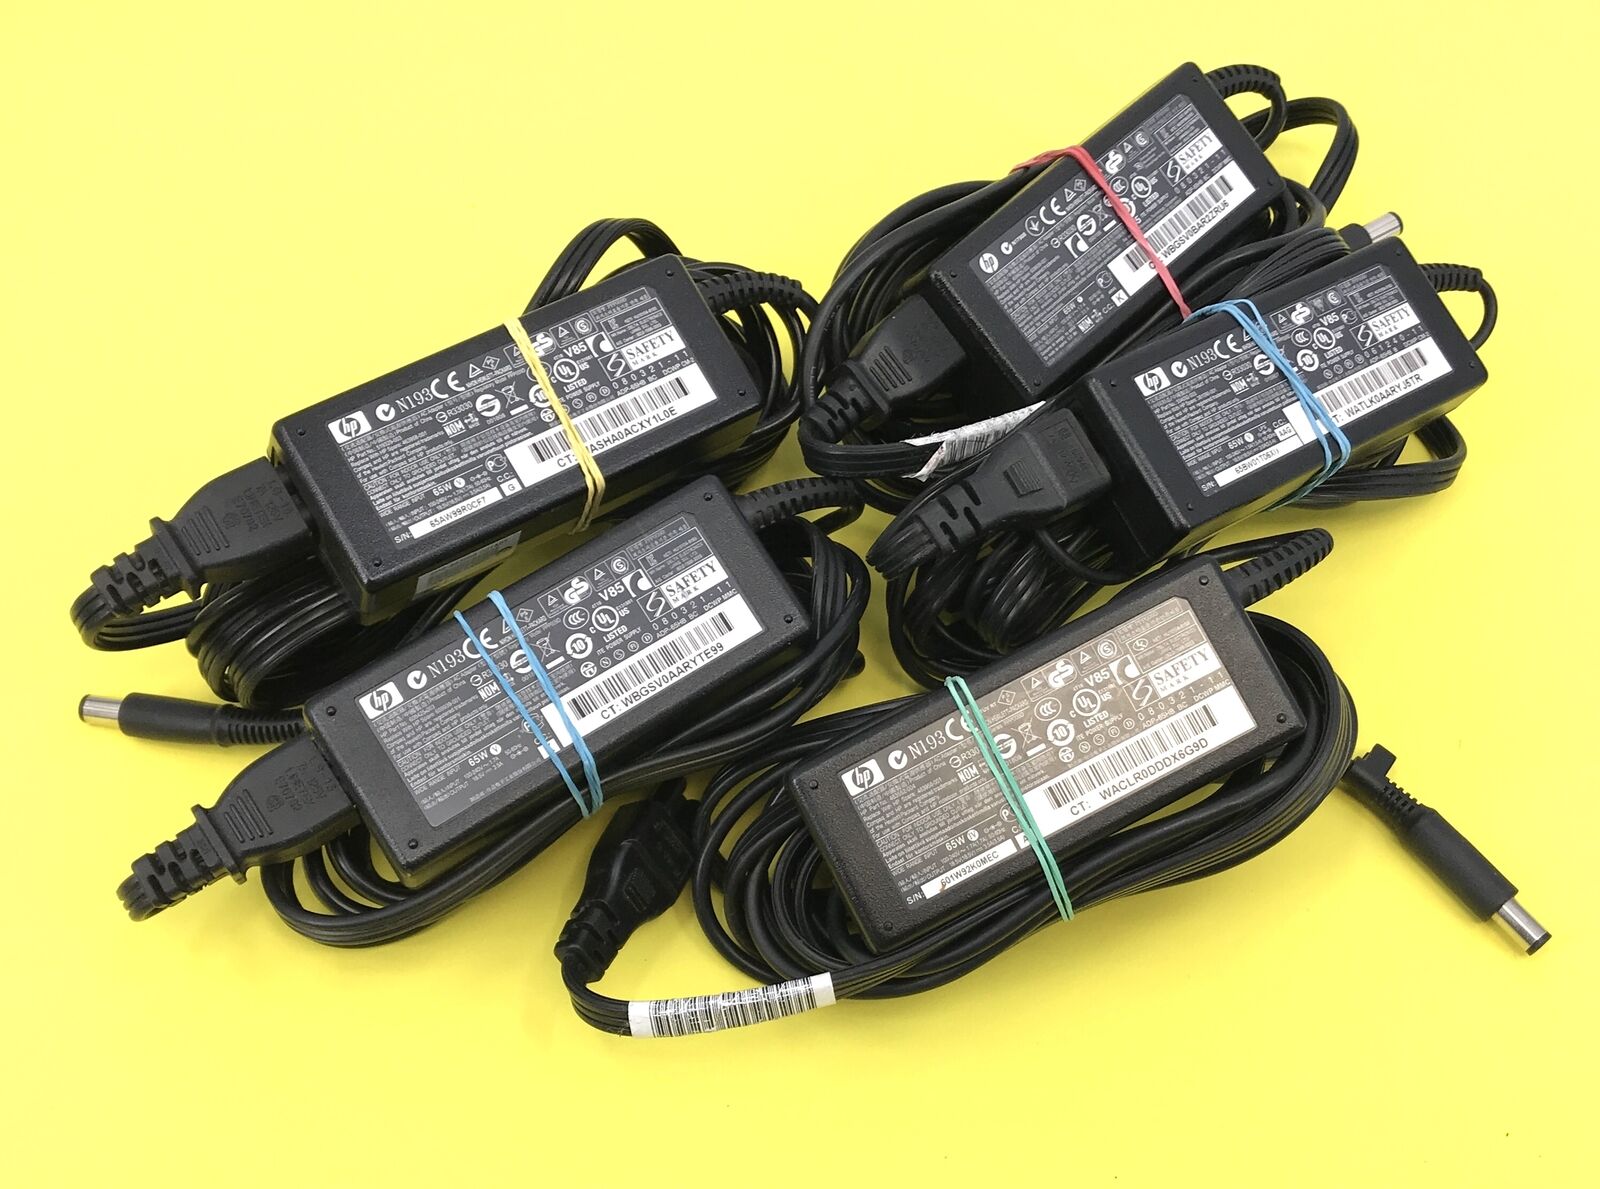 Lot of 5 HP PPP009D 18.5 V 3.5A 65w Laptop AC Power Supply Adapter #L5797